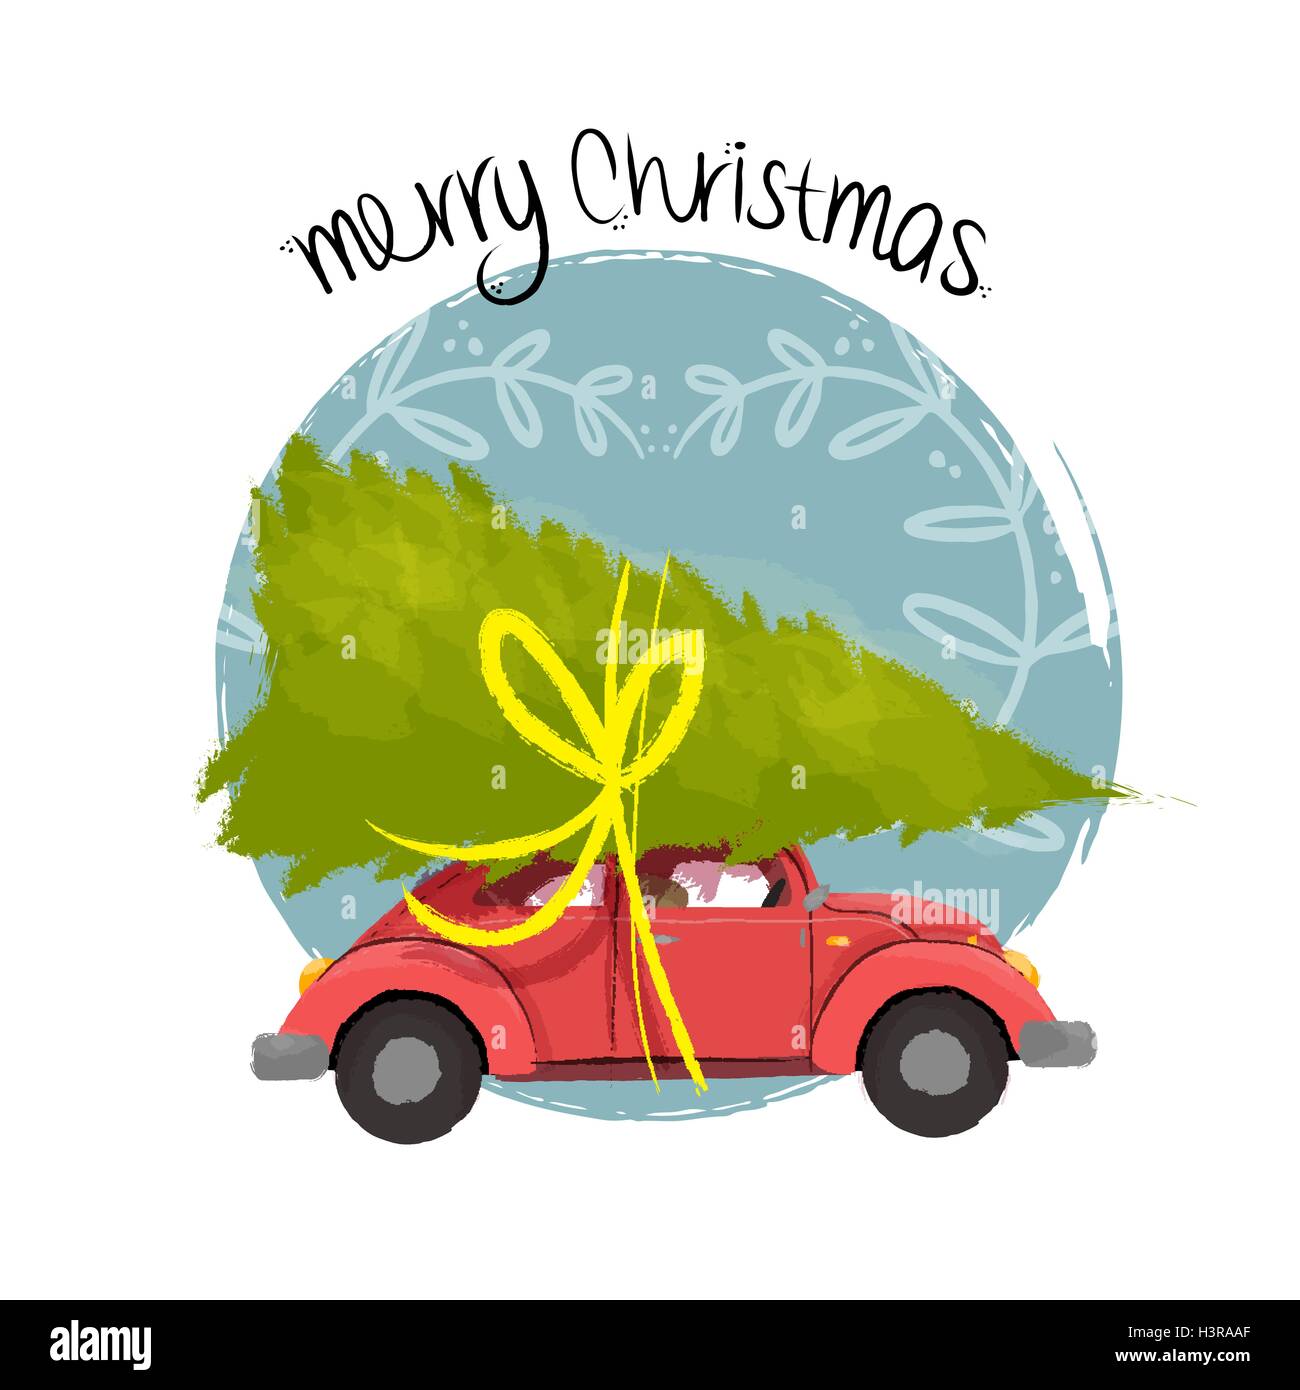 Merry christmas hand drawn illustration of vintage red car with xmas pine tree gift on roof. EPS10 vector. Stock Vector